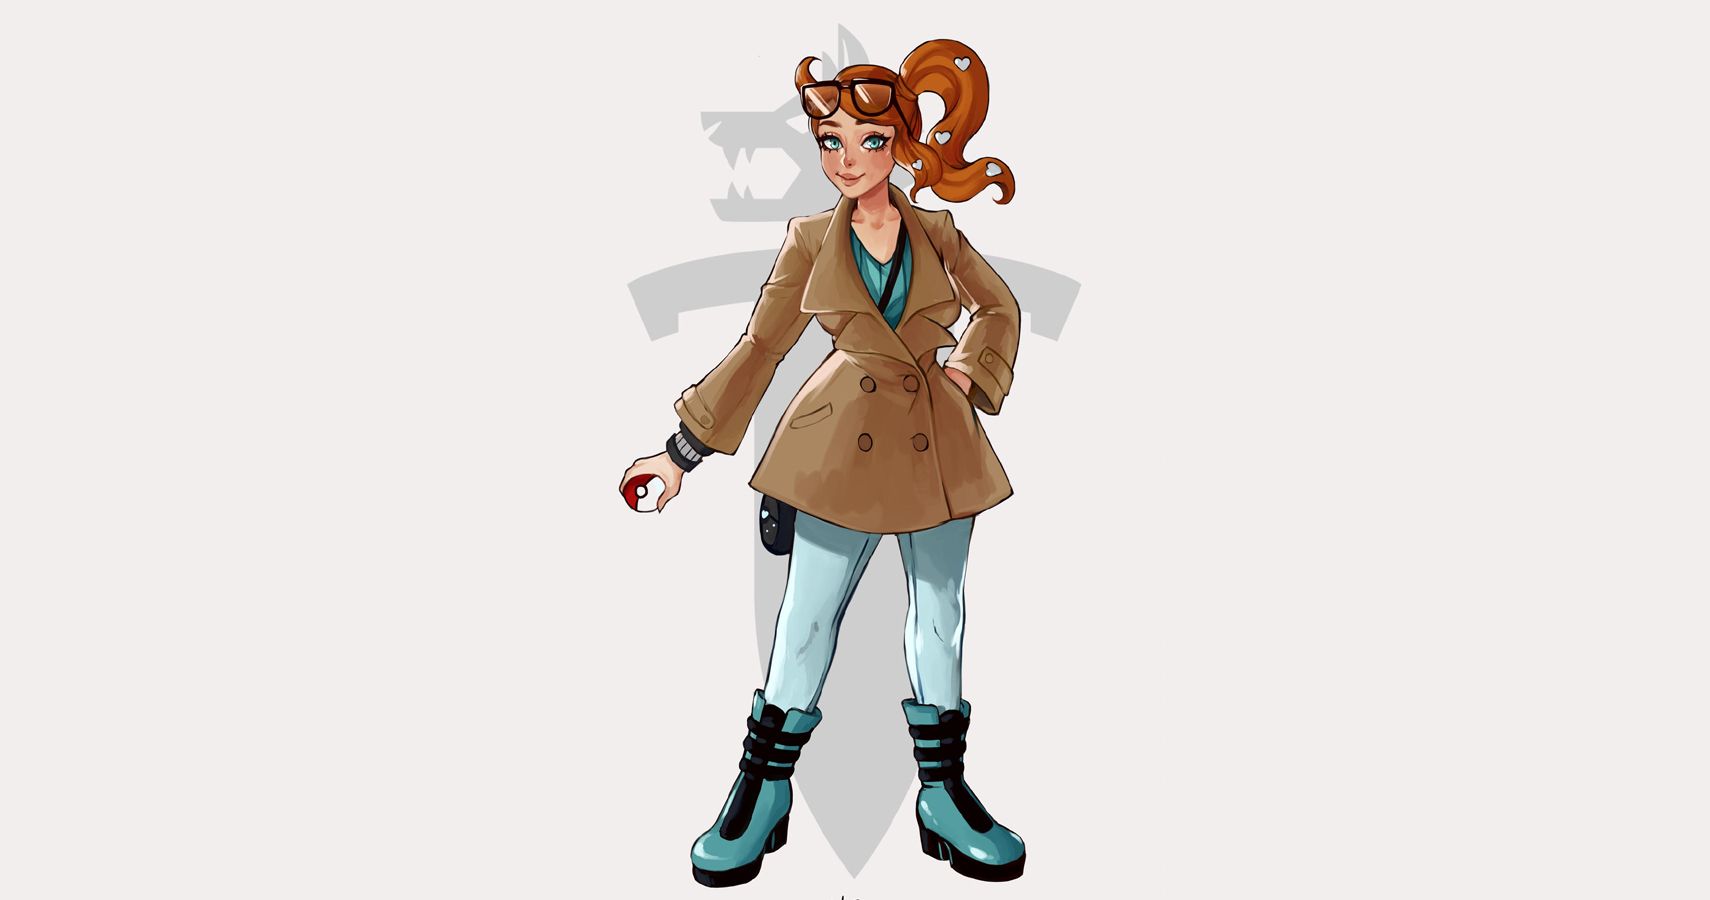 Pokémon Sword & Shield 10 Sonia and Wooloo Fan Art Drawings That Have Us Excited For The New Game